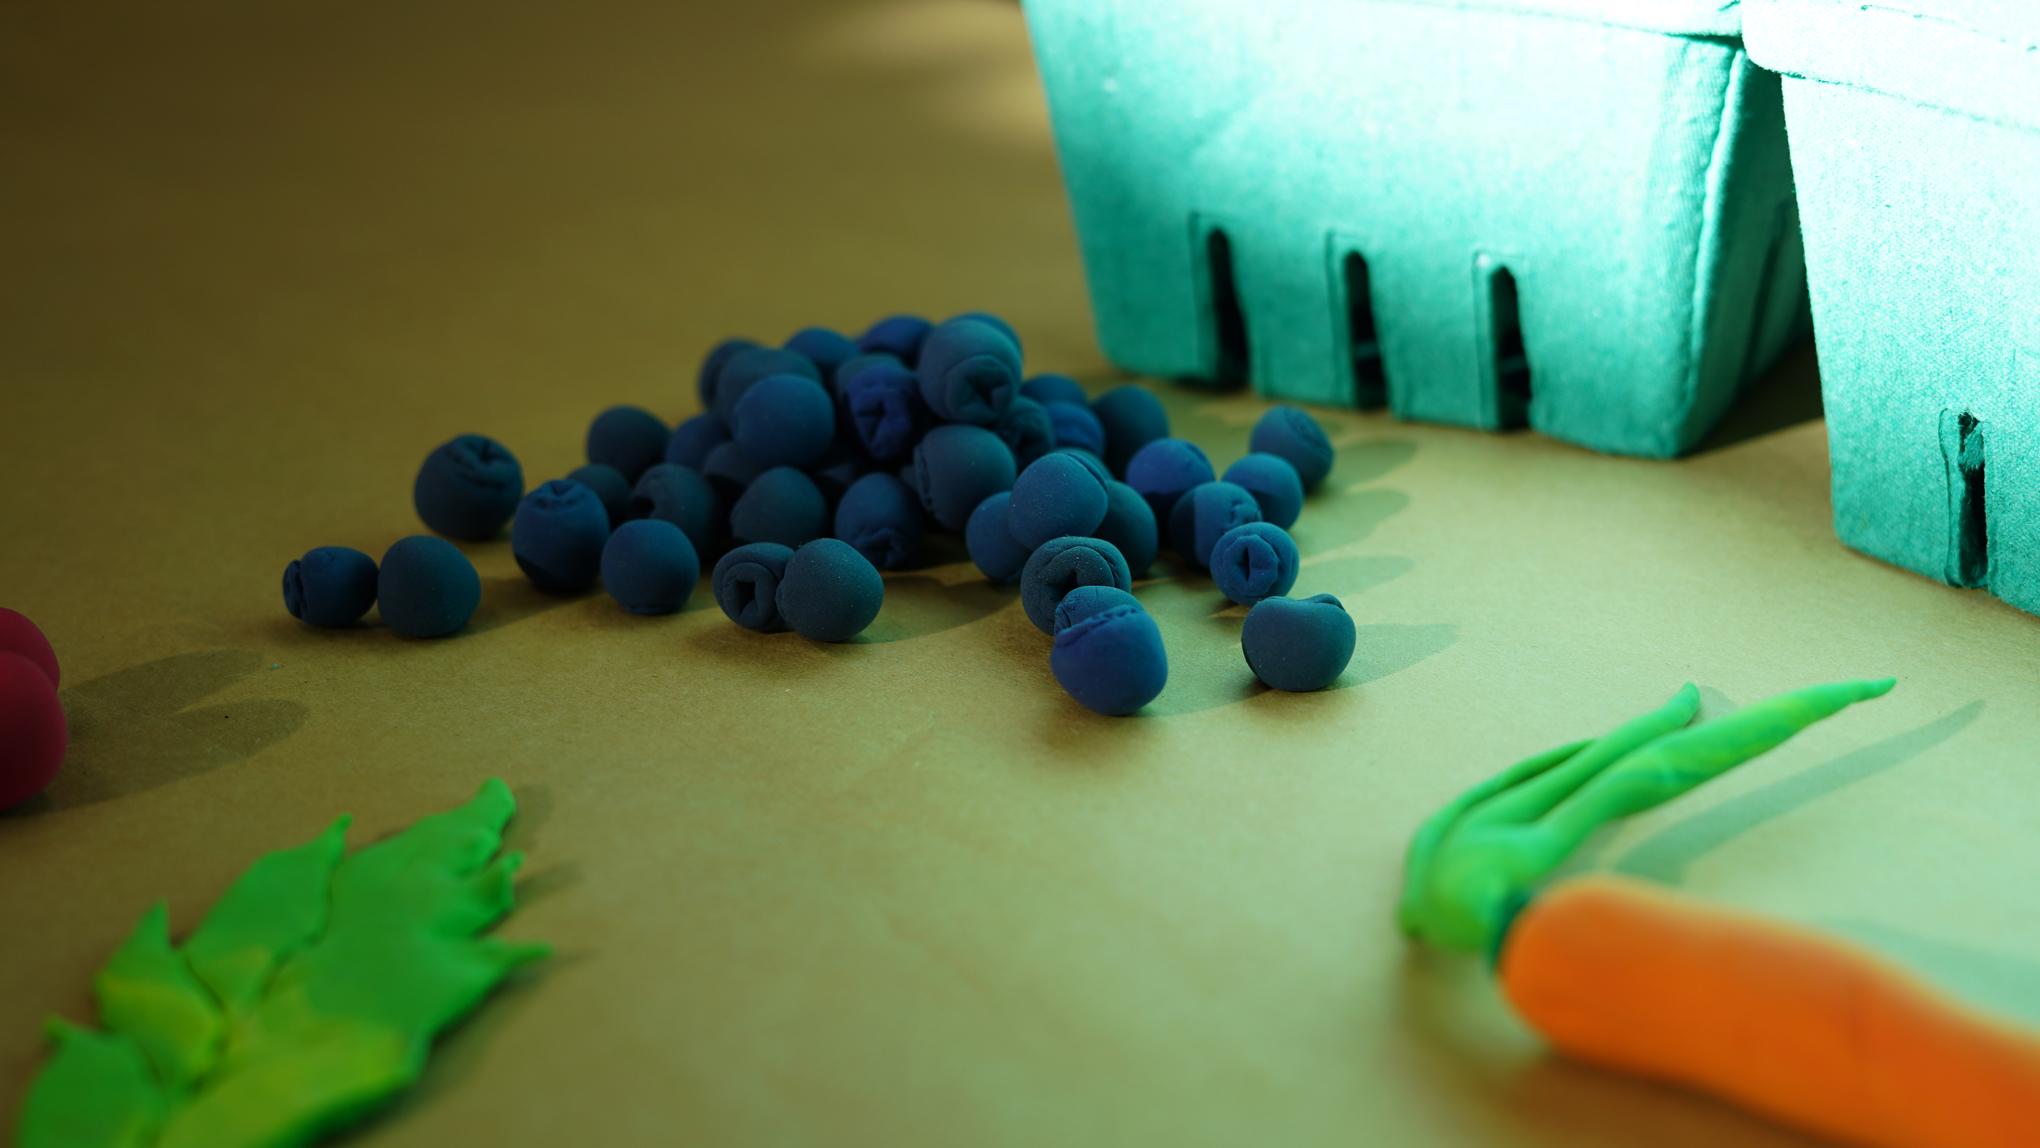 Photo of blueberries, lettuce, and a carrot made from modeling clay on a surface next to some green molded pulp berry baskets